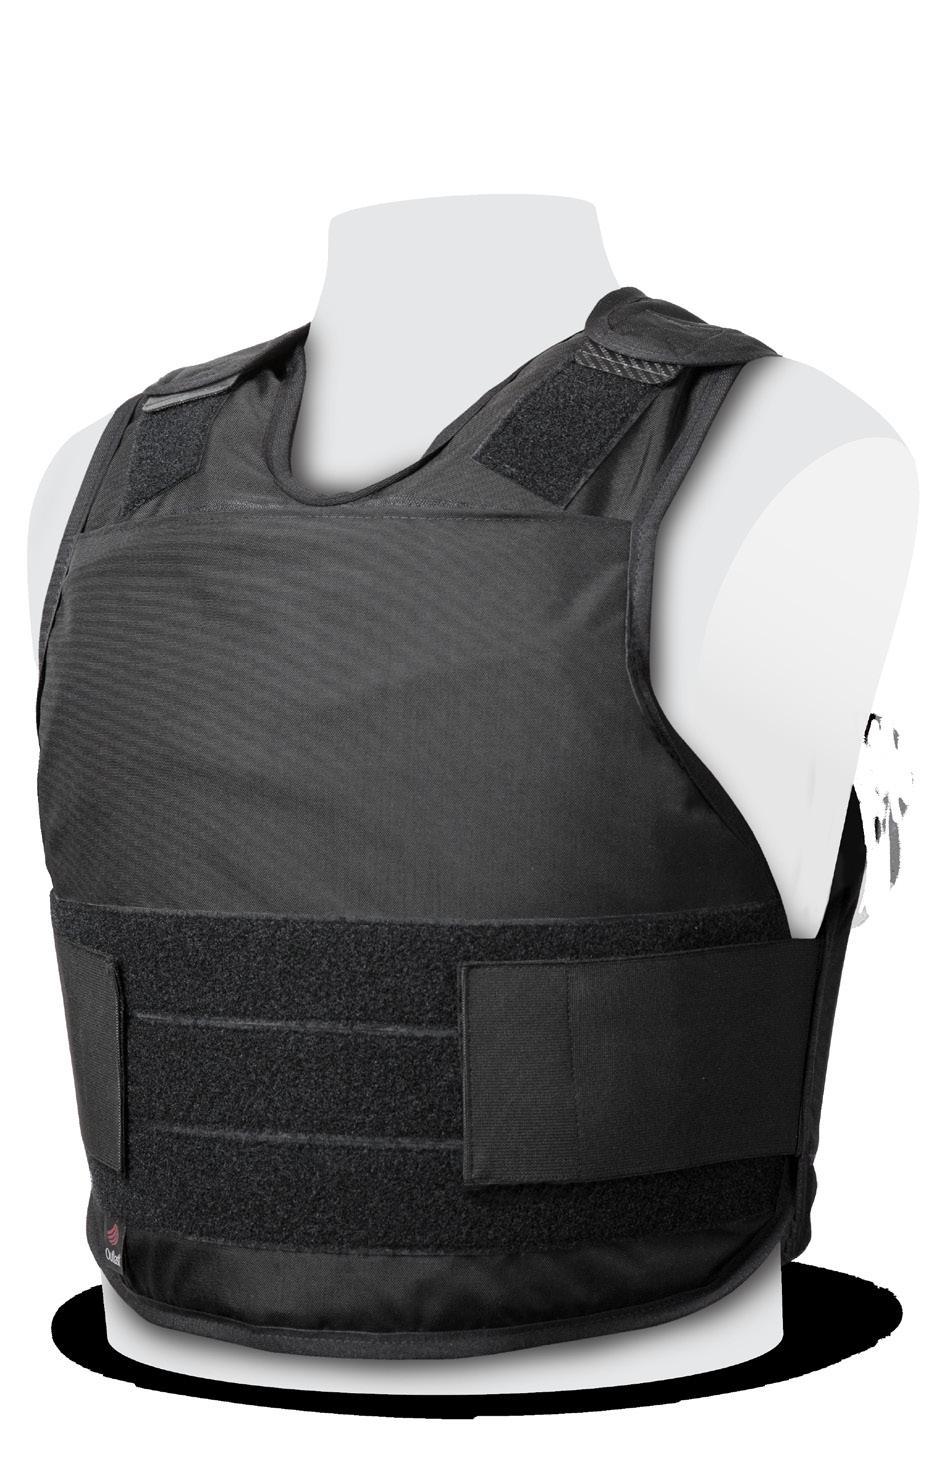 Bullet Resistant Vest - MV2 Model #: 500122 Protection Level: NIJ Level IIIA+ This outstanding bullet resistant vest has not only passed the most up to date National Institute of Justice Standard